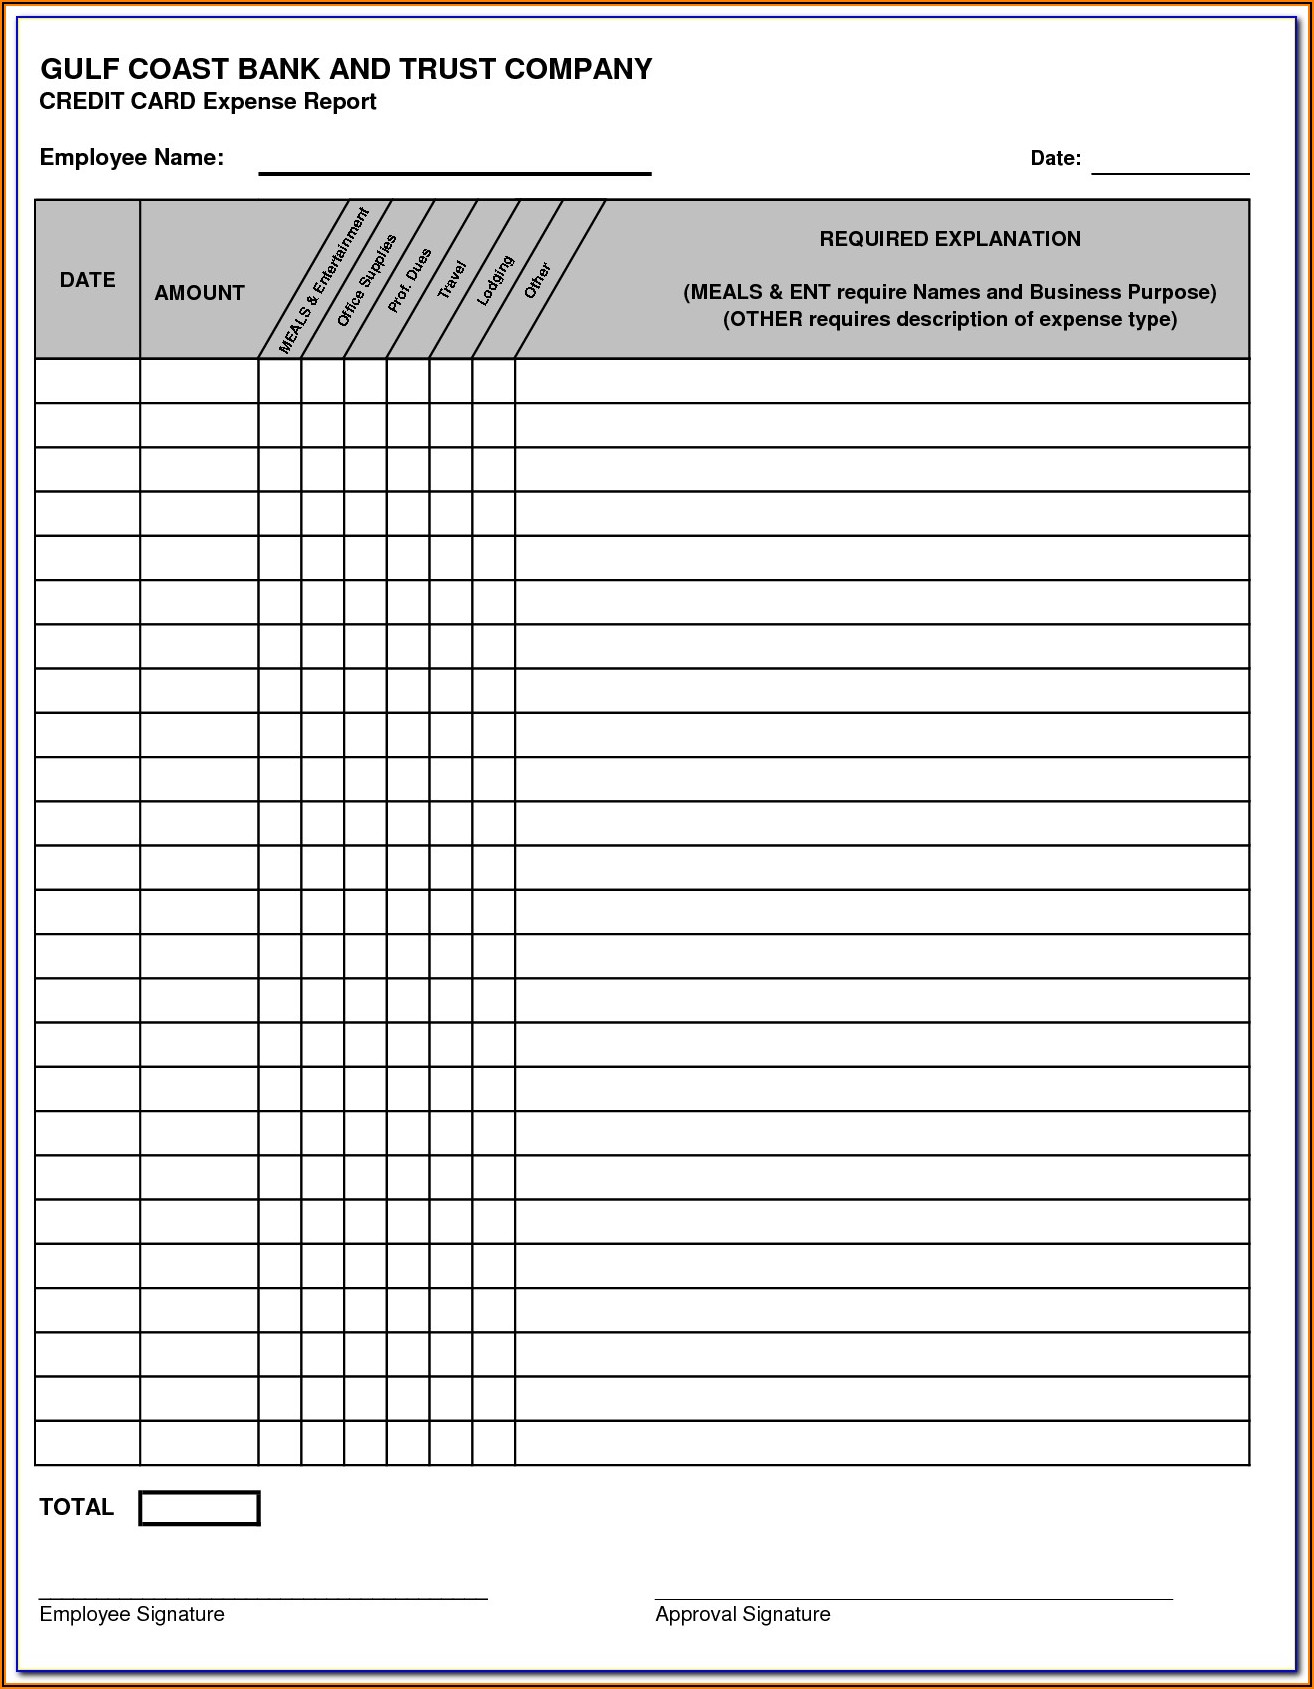 Credit Card Expense Approval Form